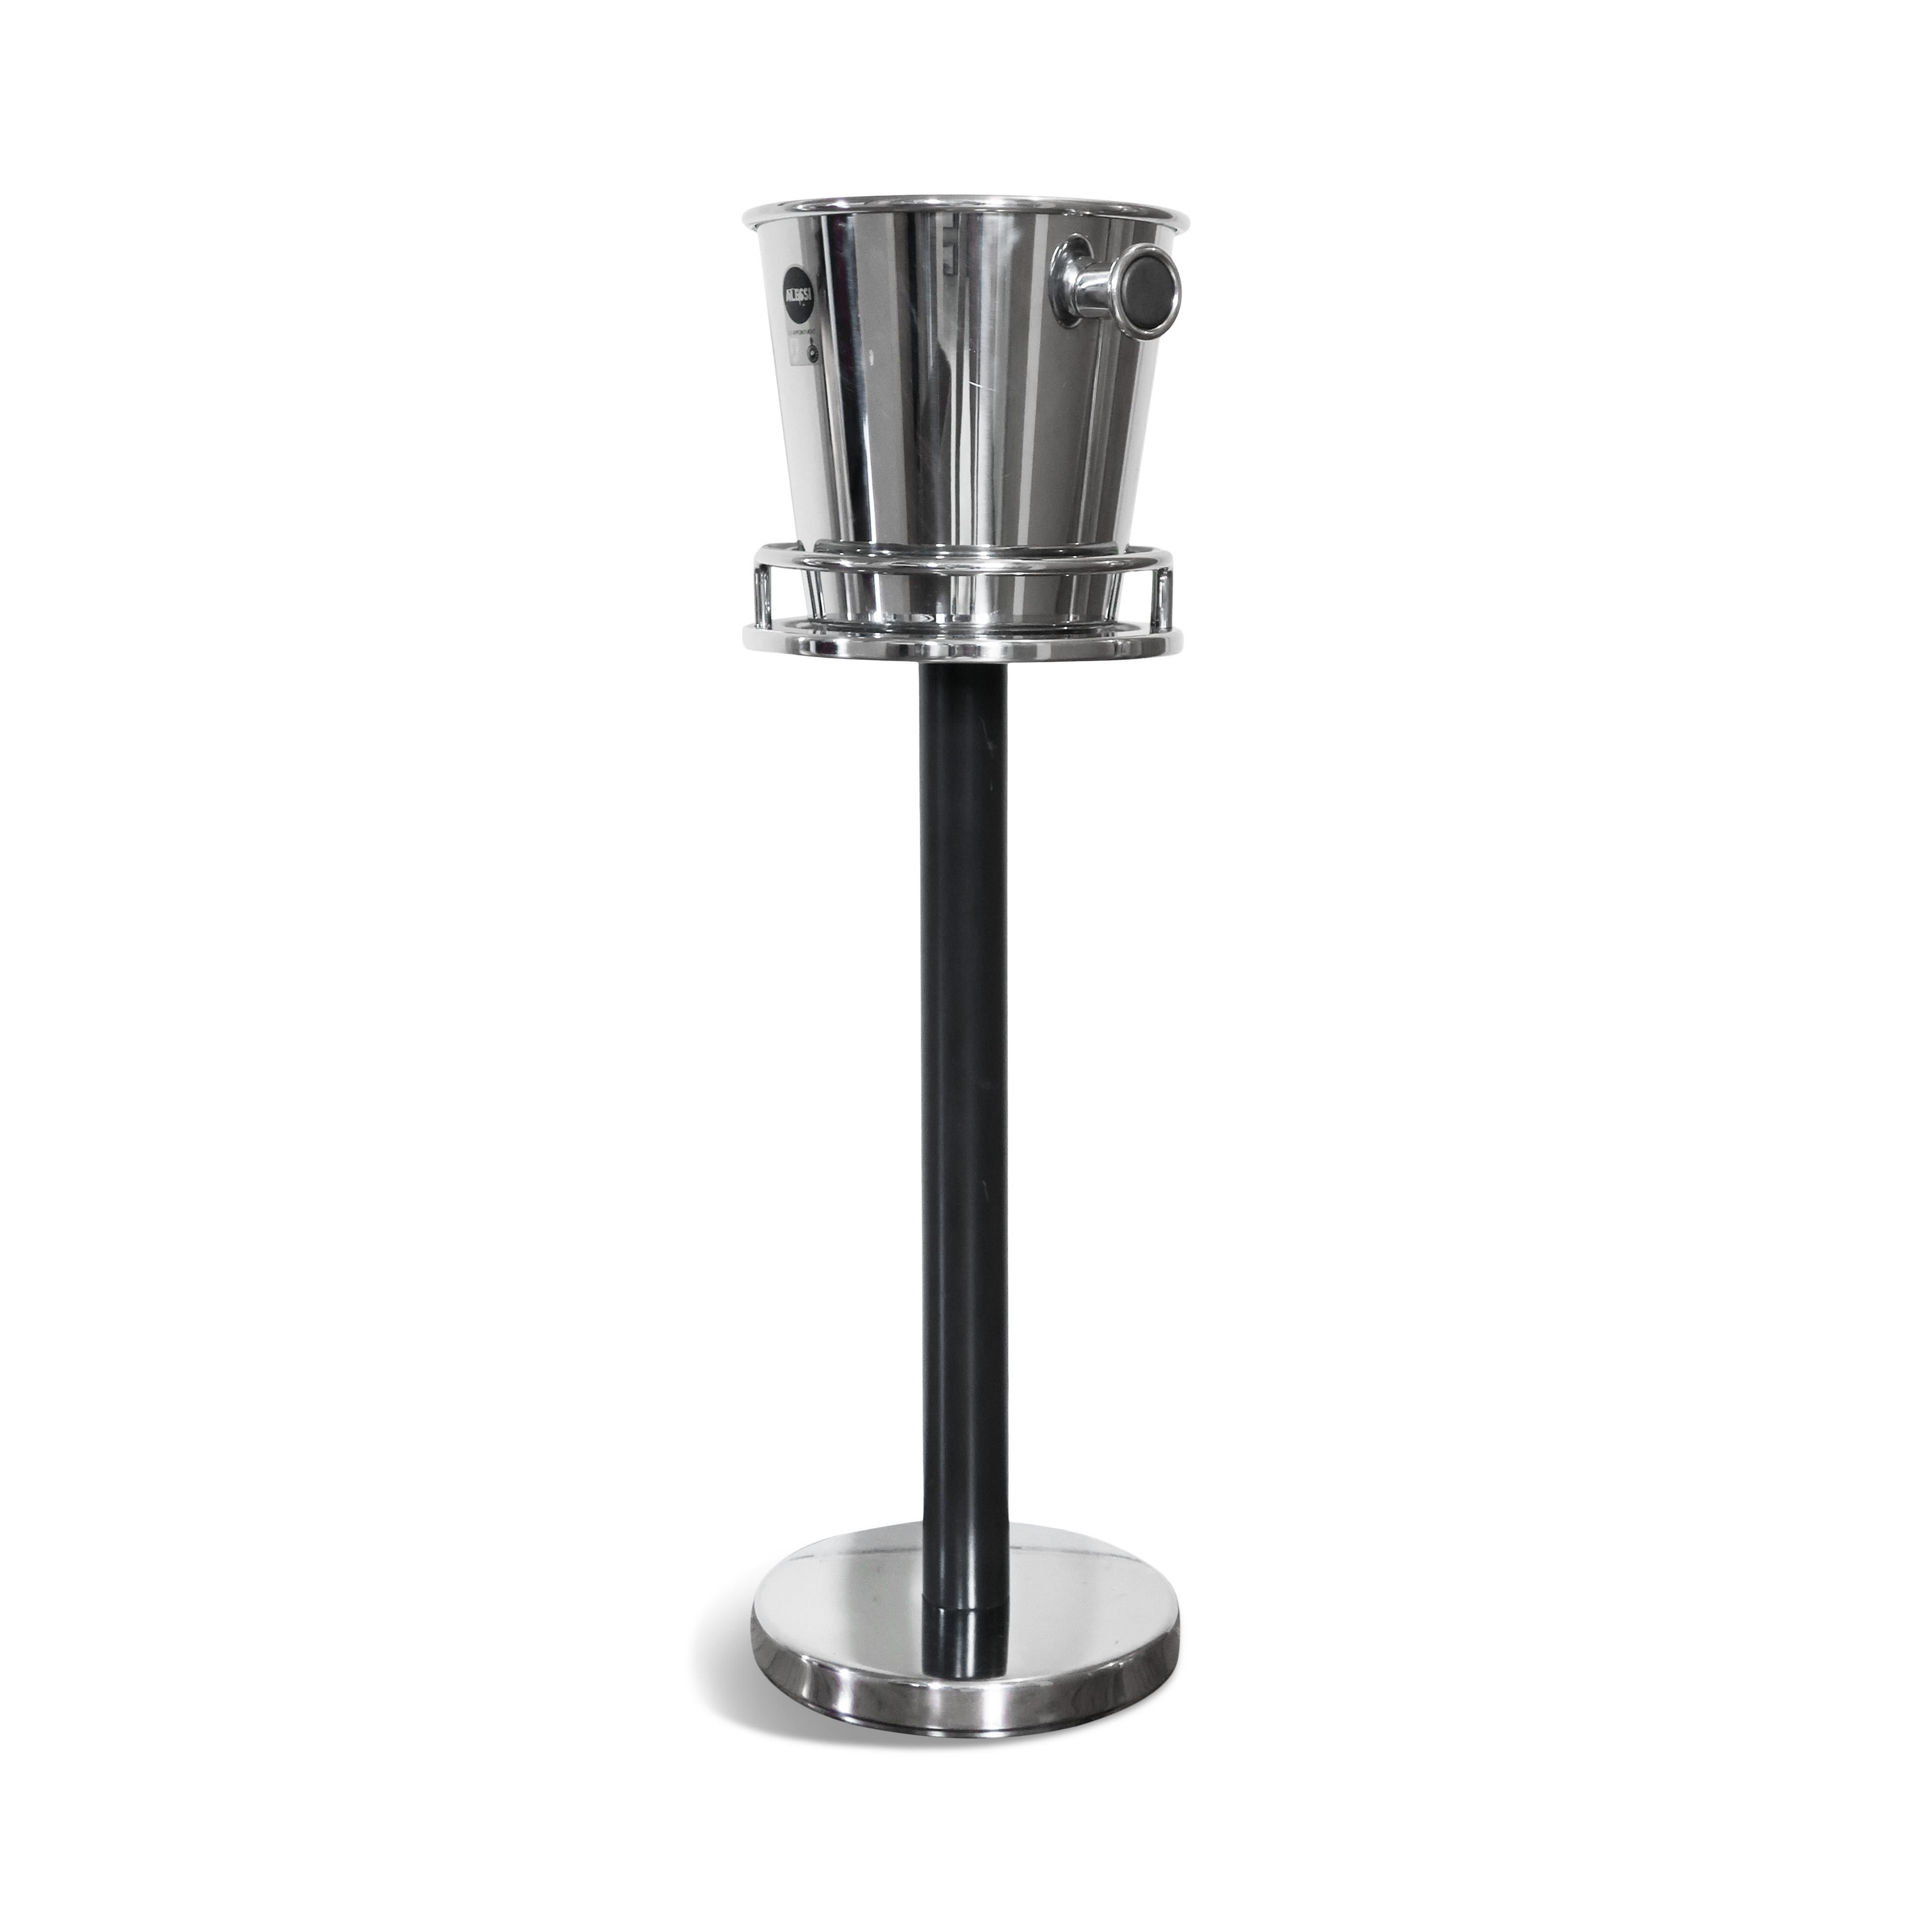 A classic polished 18/10 stainless steel wine cooler and stand designed by Ettore Sottsass for Alessi in 1979. A unique handle design and rolled rim allow getting a perfect grip with just one hand. The stand has a stainless weighted base and top